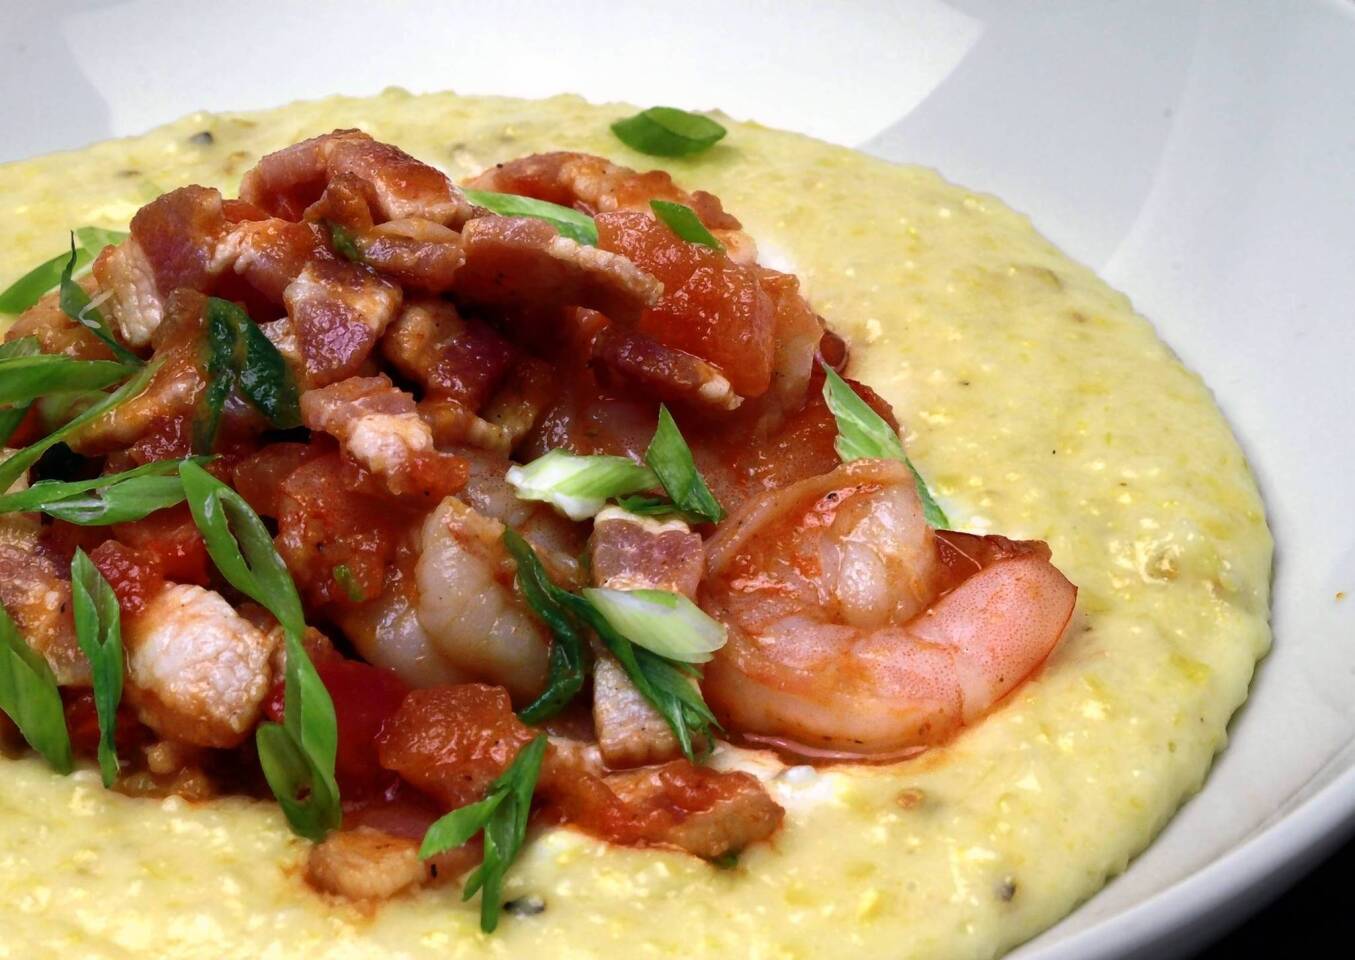 Stella's Southern Bistro's shrimp and grits recipe